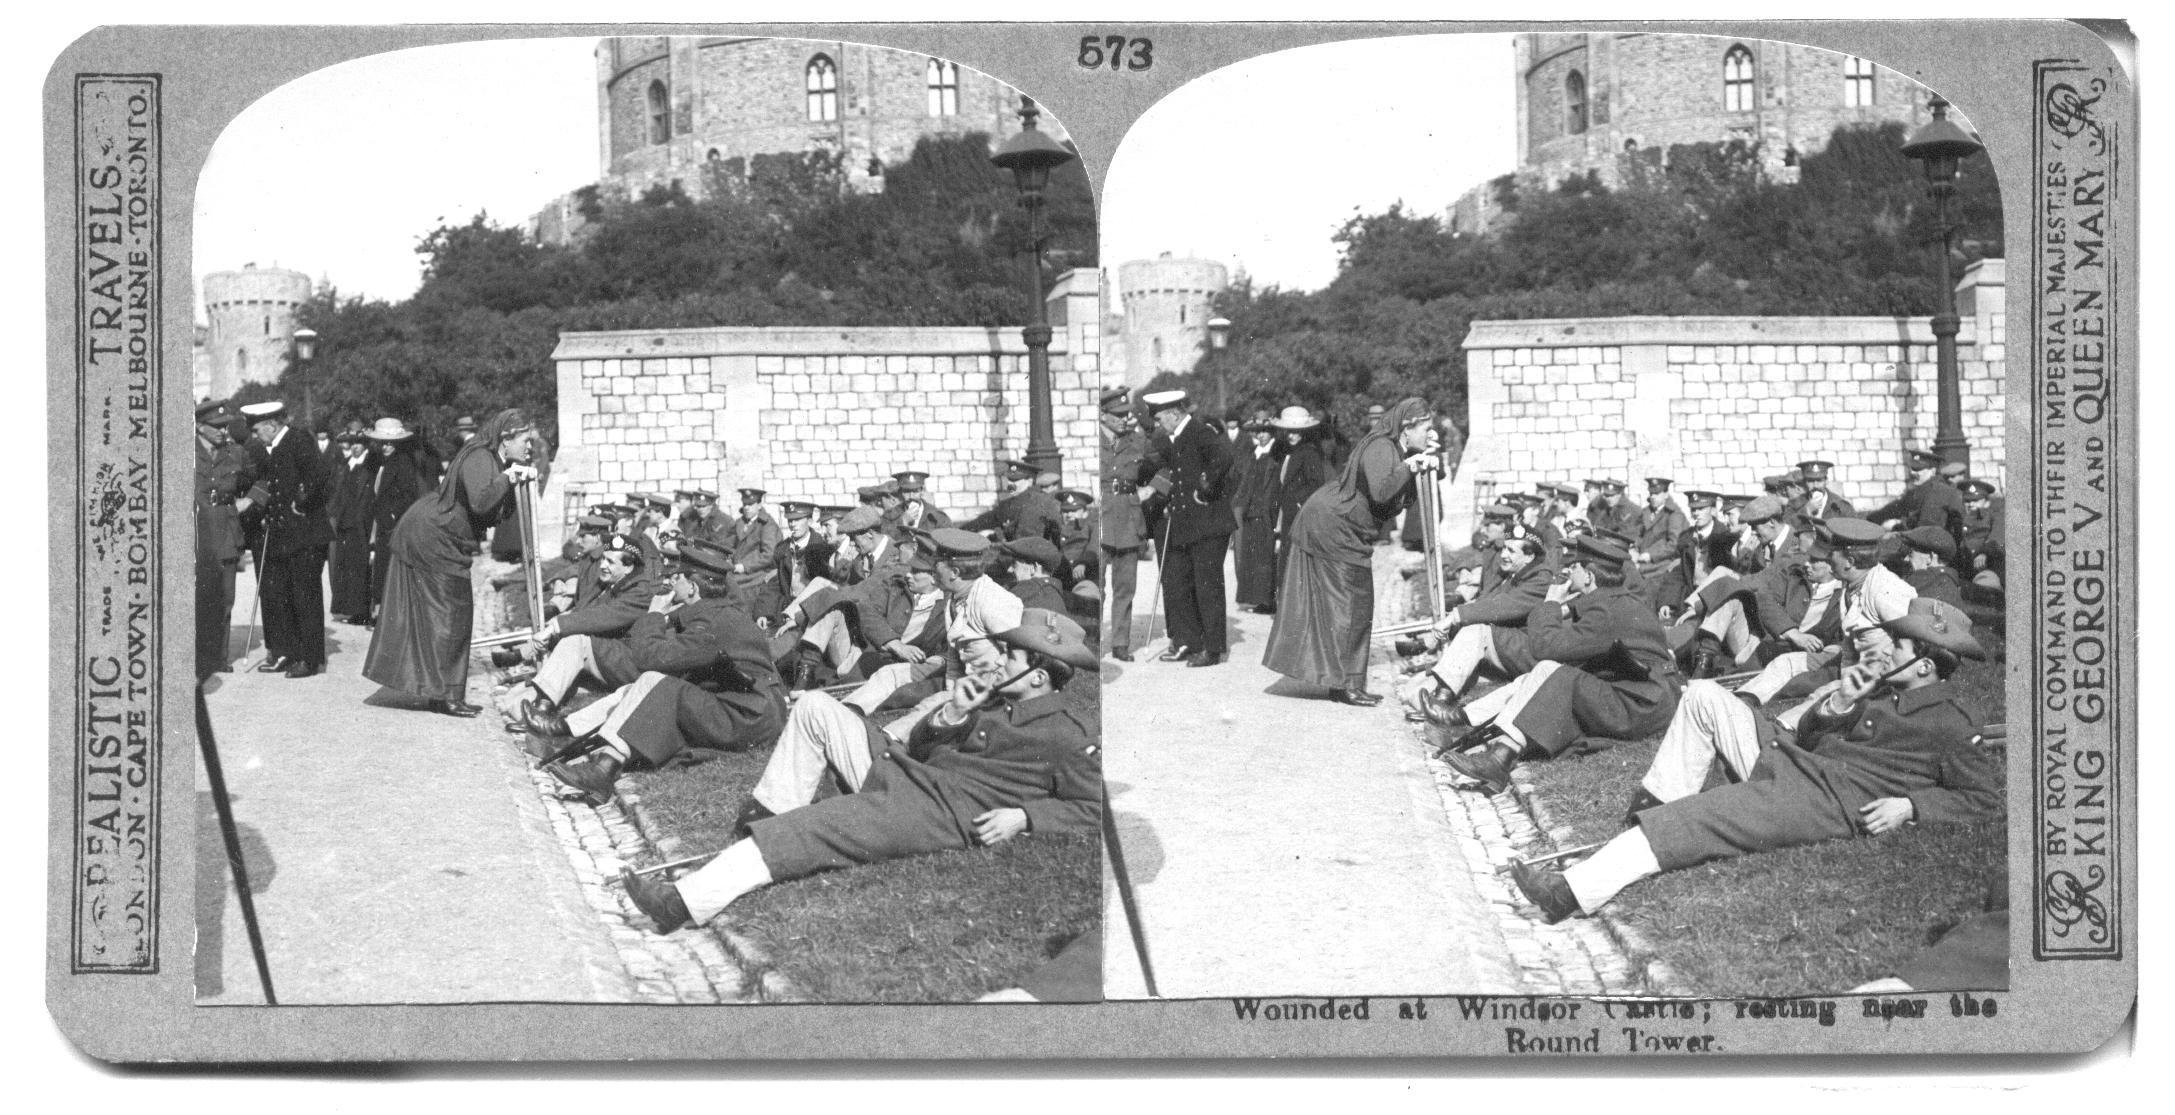 Wounded at Windsor Castle; resting near the Round Tower